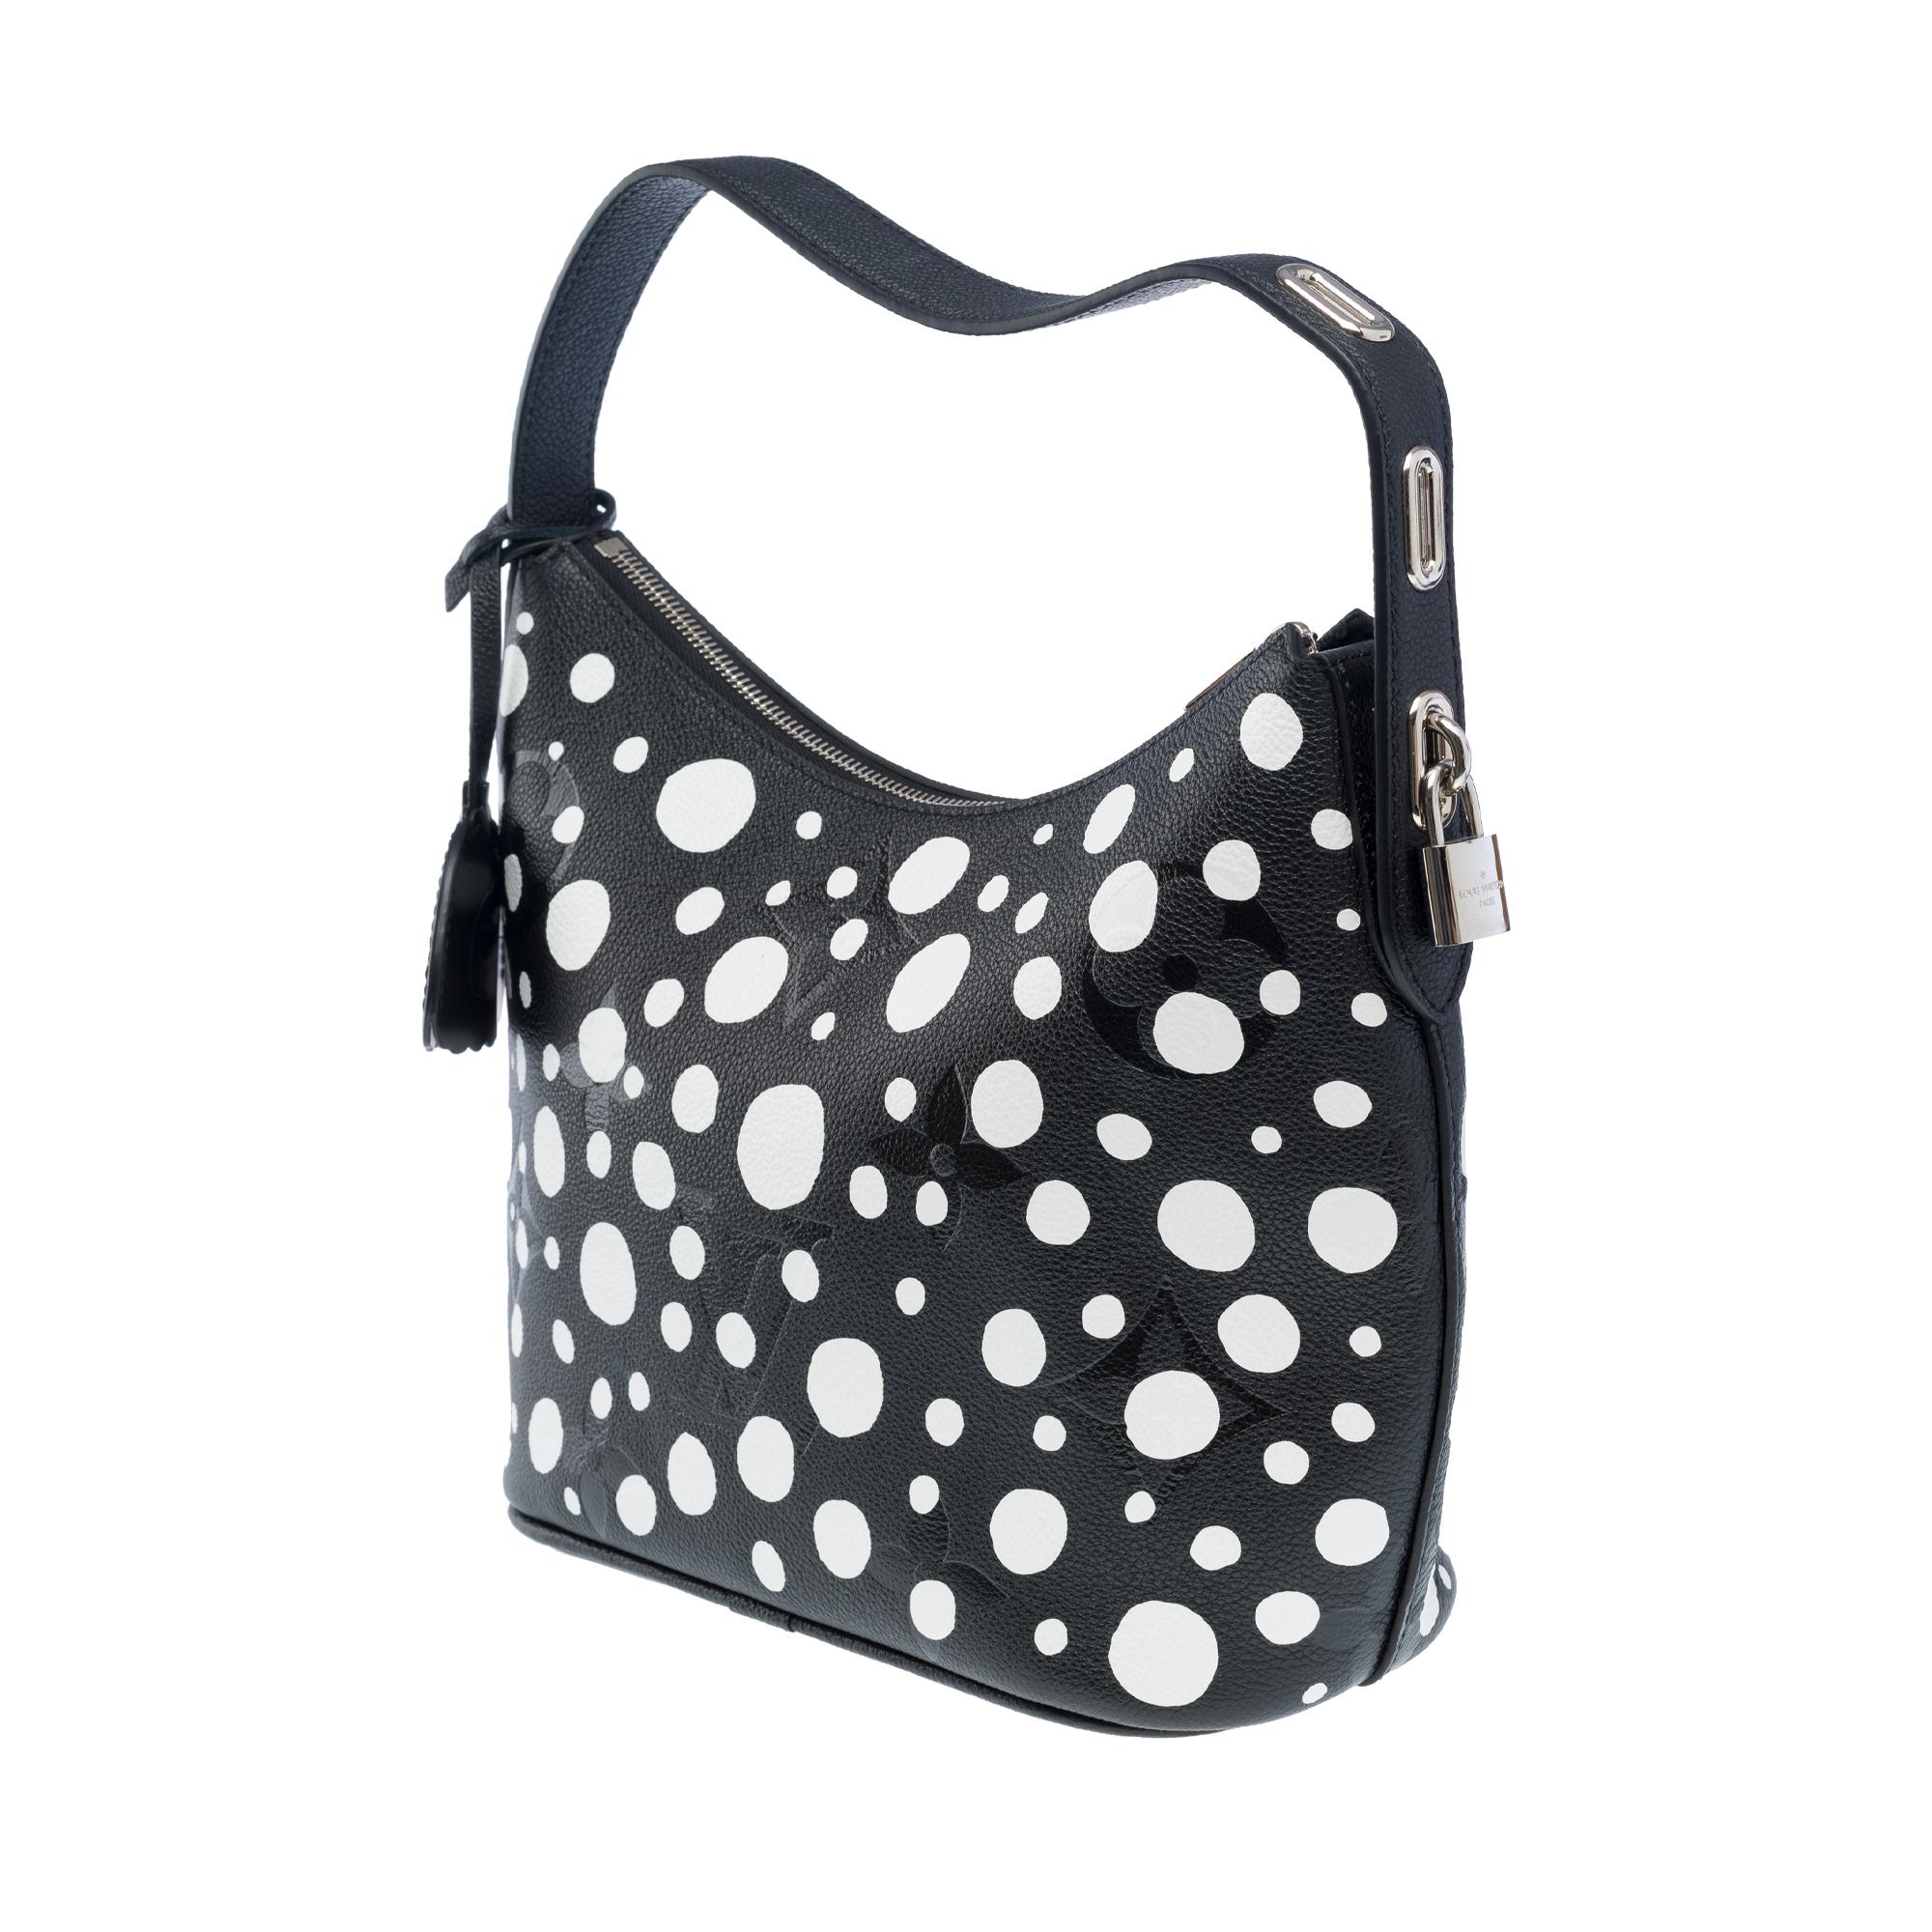 Women's Limited Edition LV x Yayoi Kusama Marshmallow Tote bag in White&Black, SHW